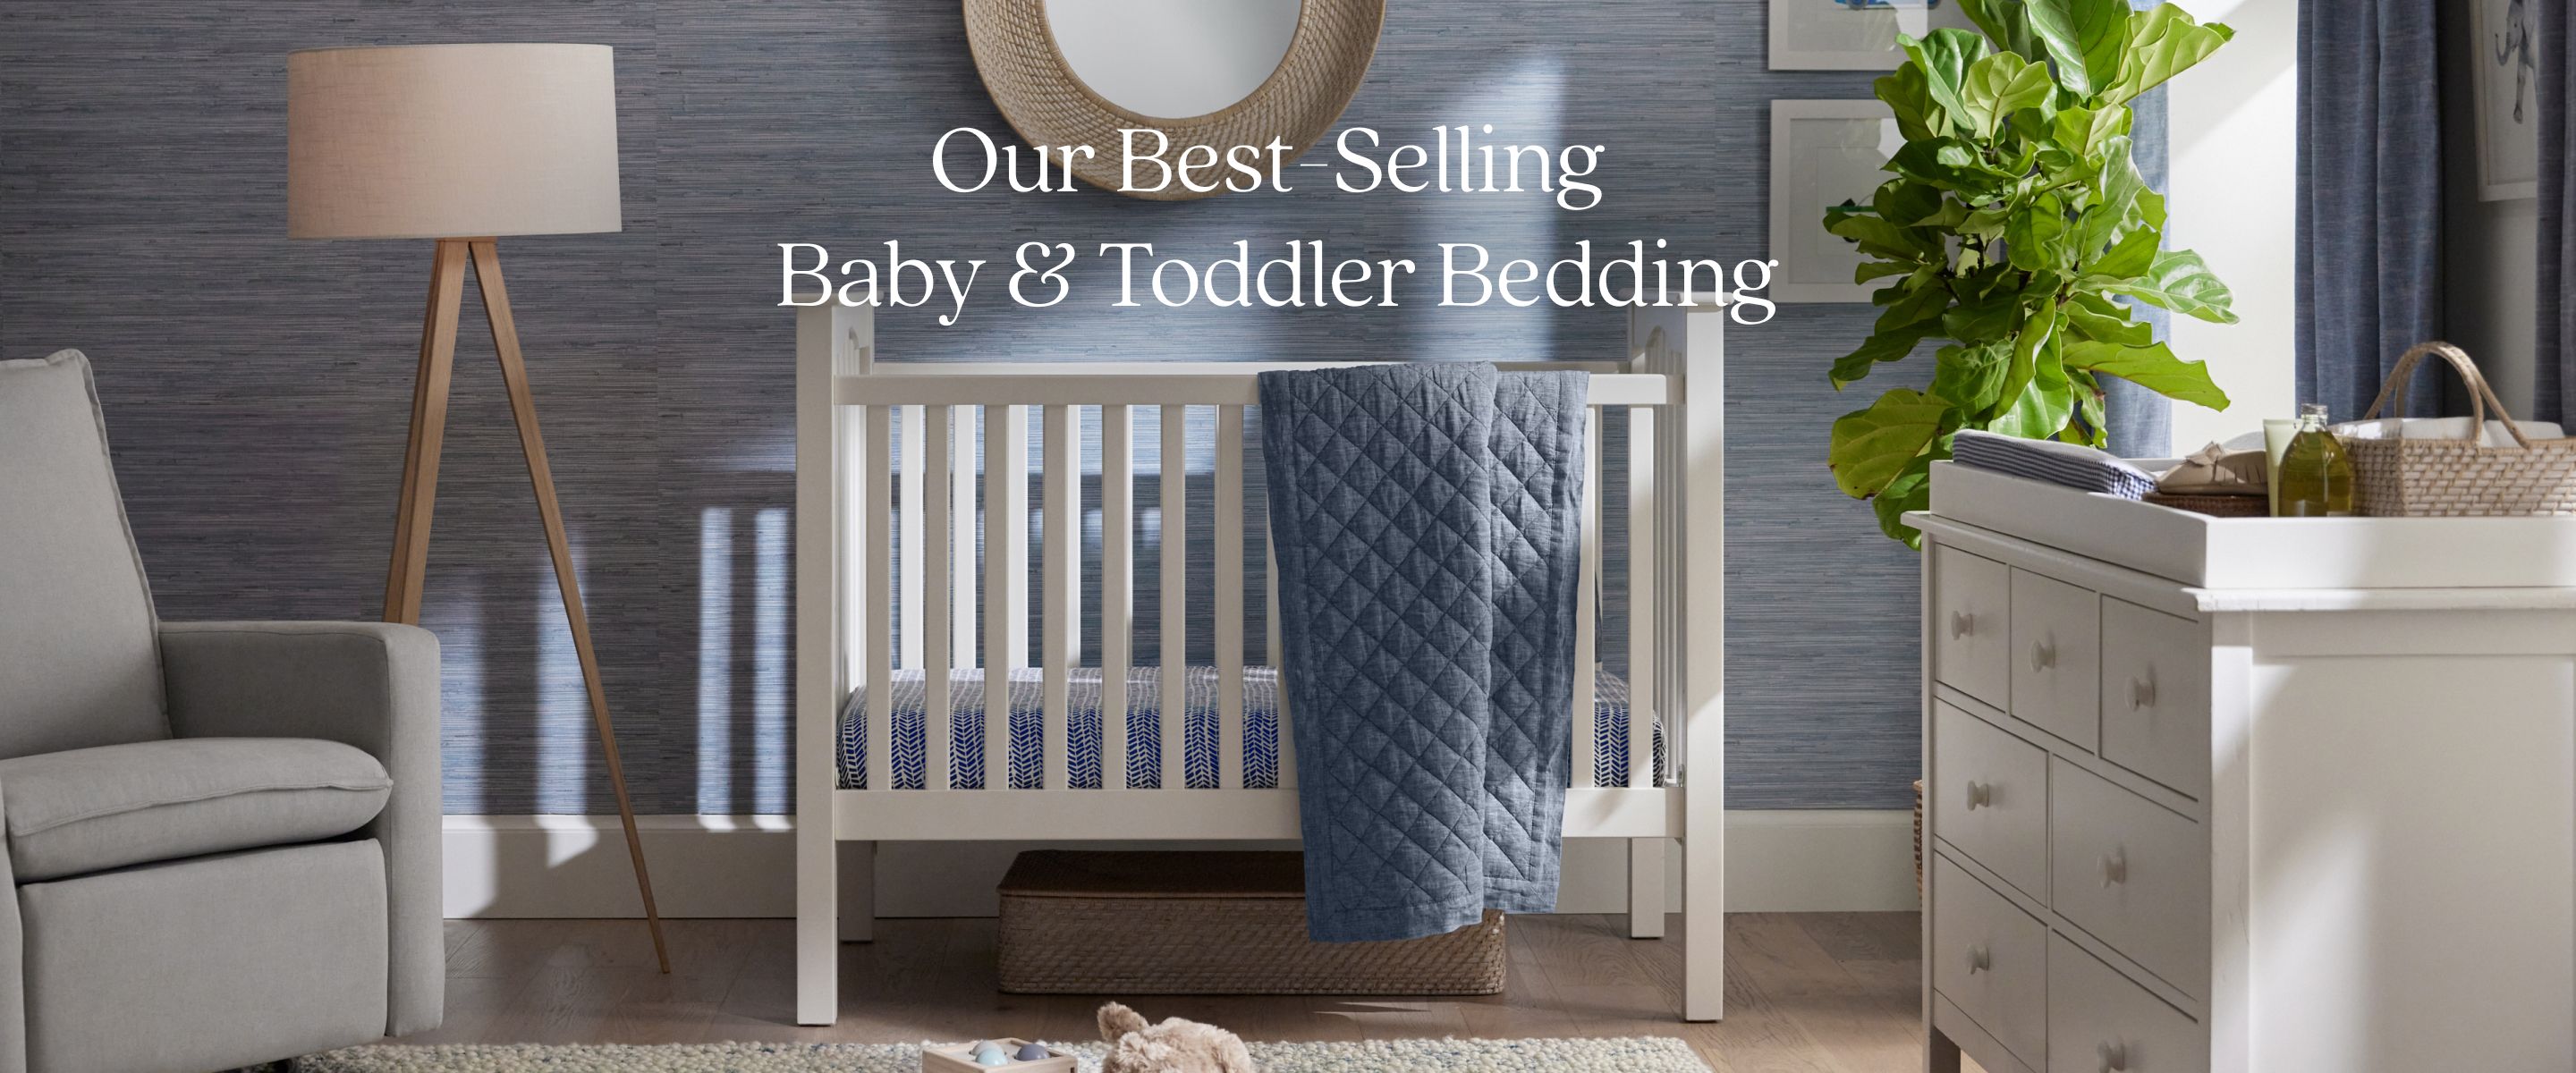 Our Best-Selling Baby & Toddler Bedding